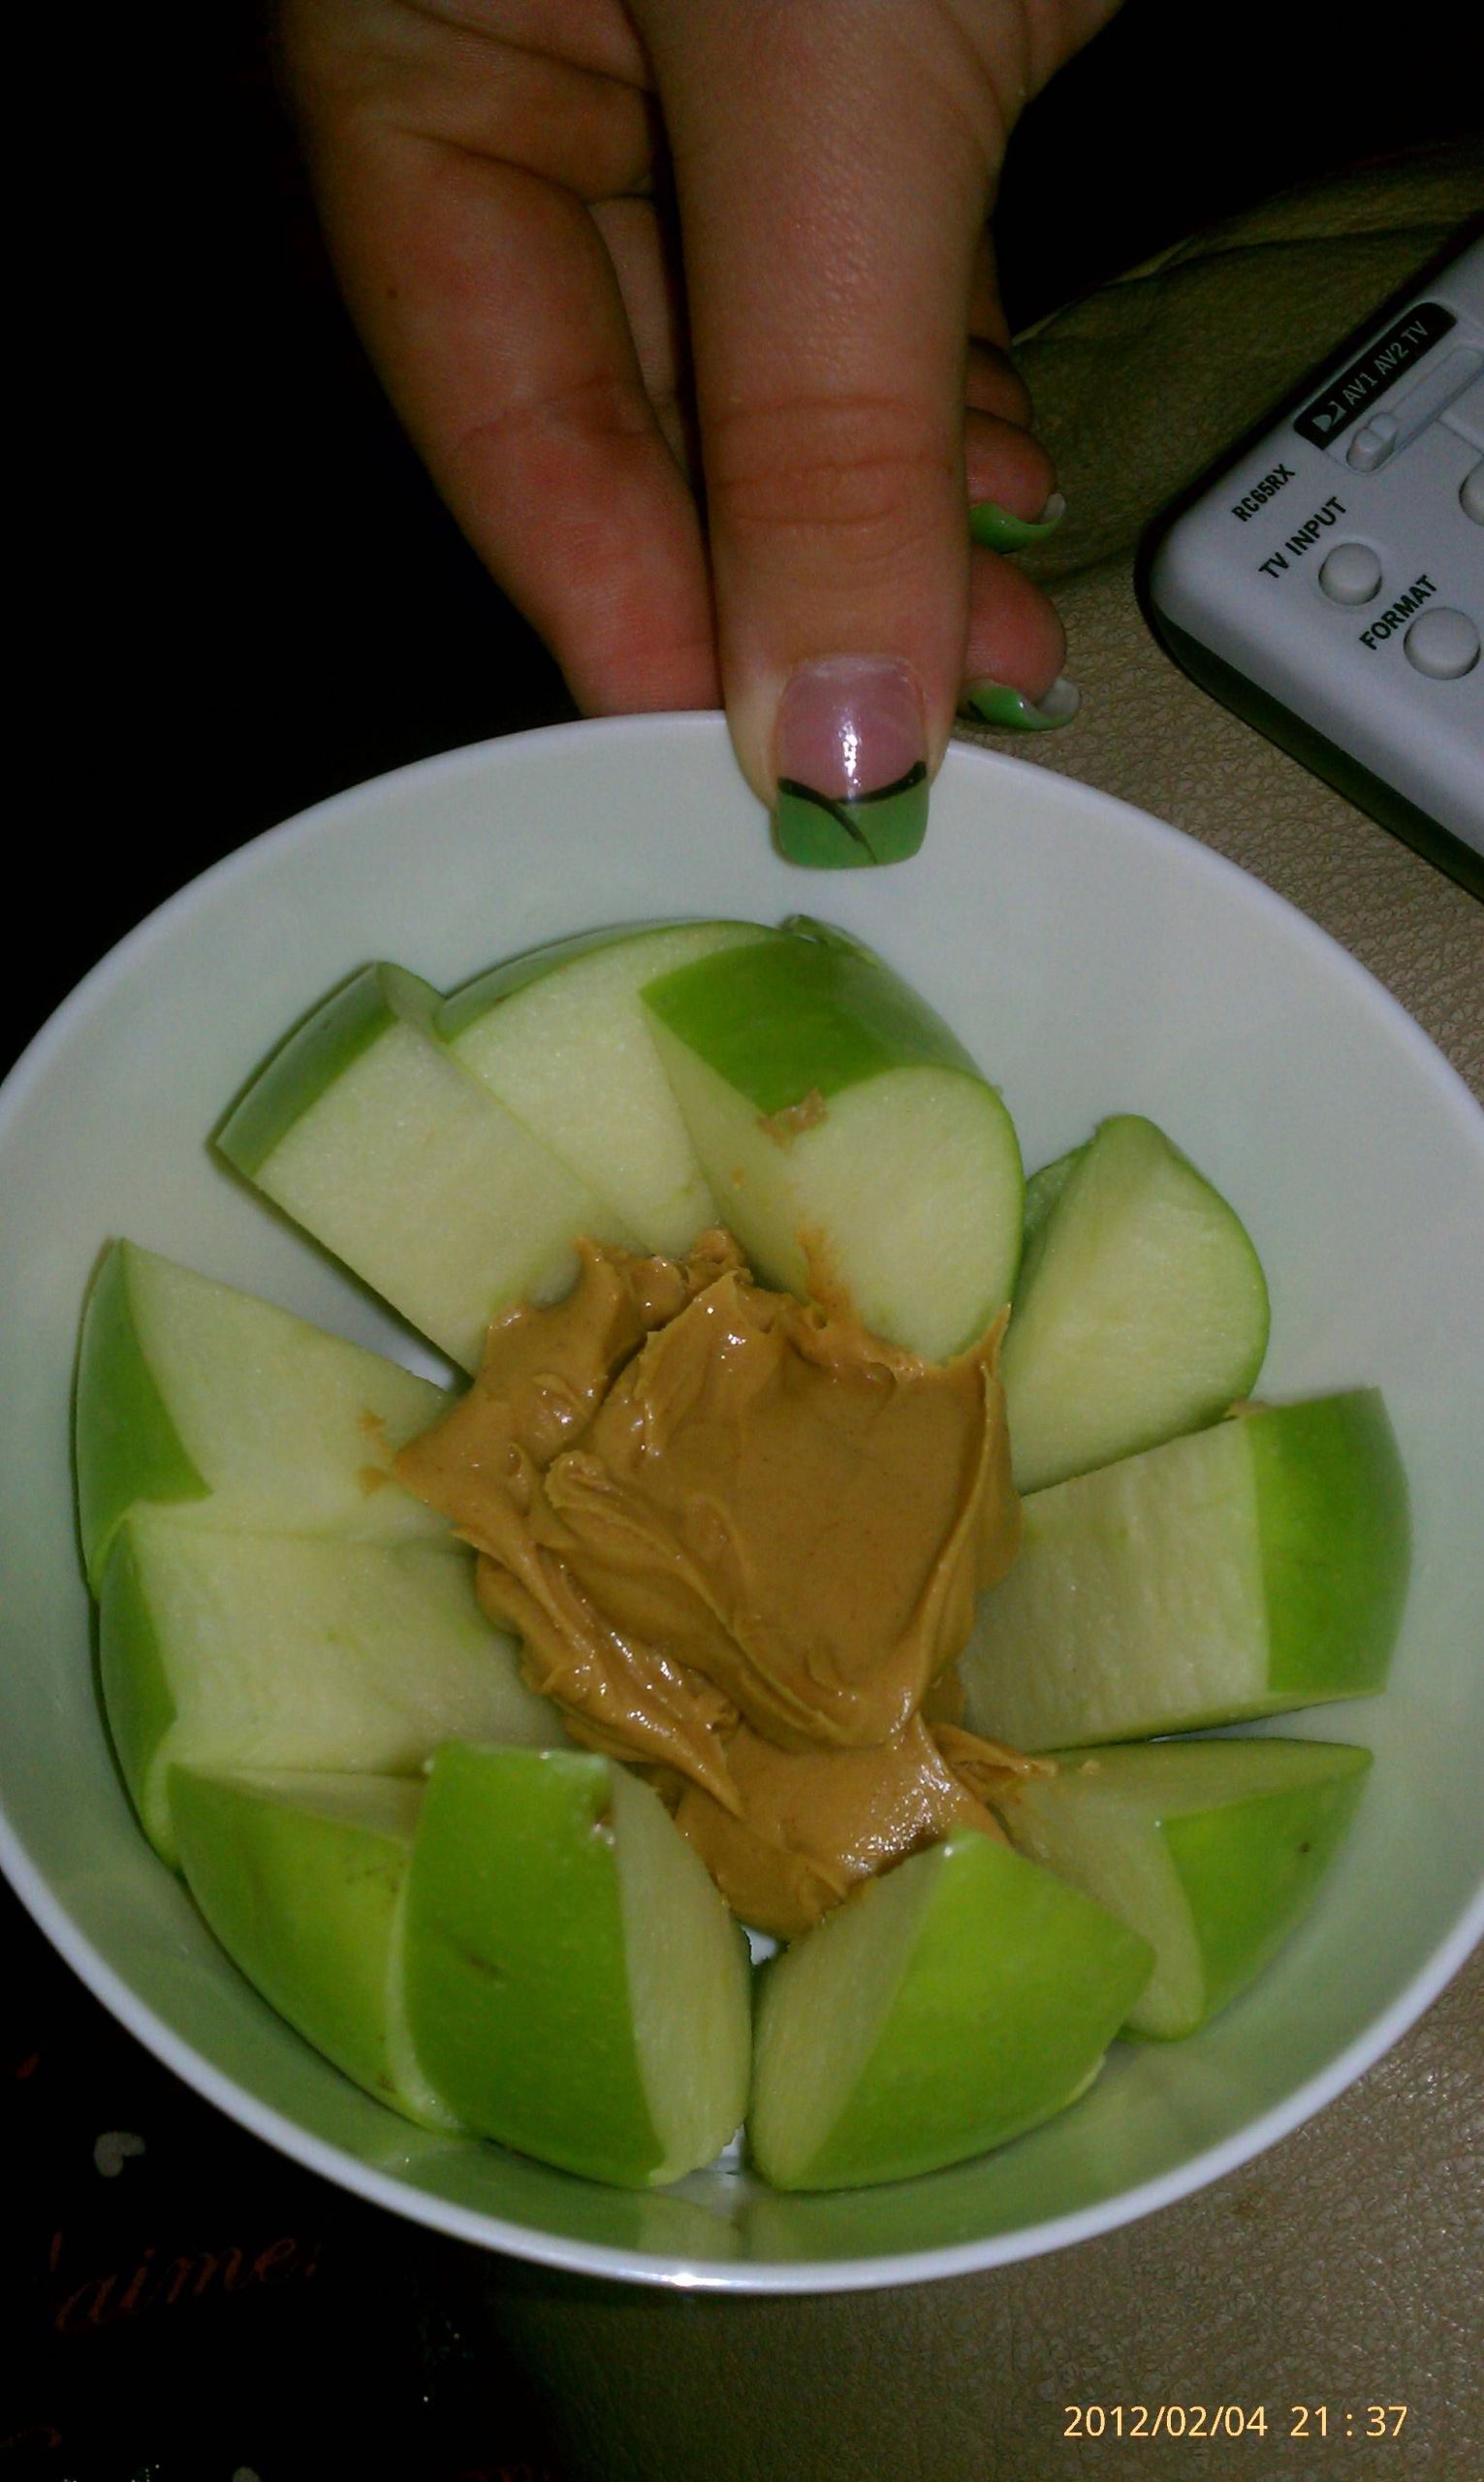 Late Night Healthy Snacks
 Healthy late night snack